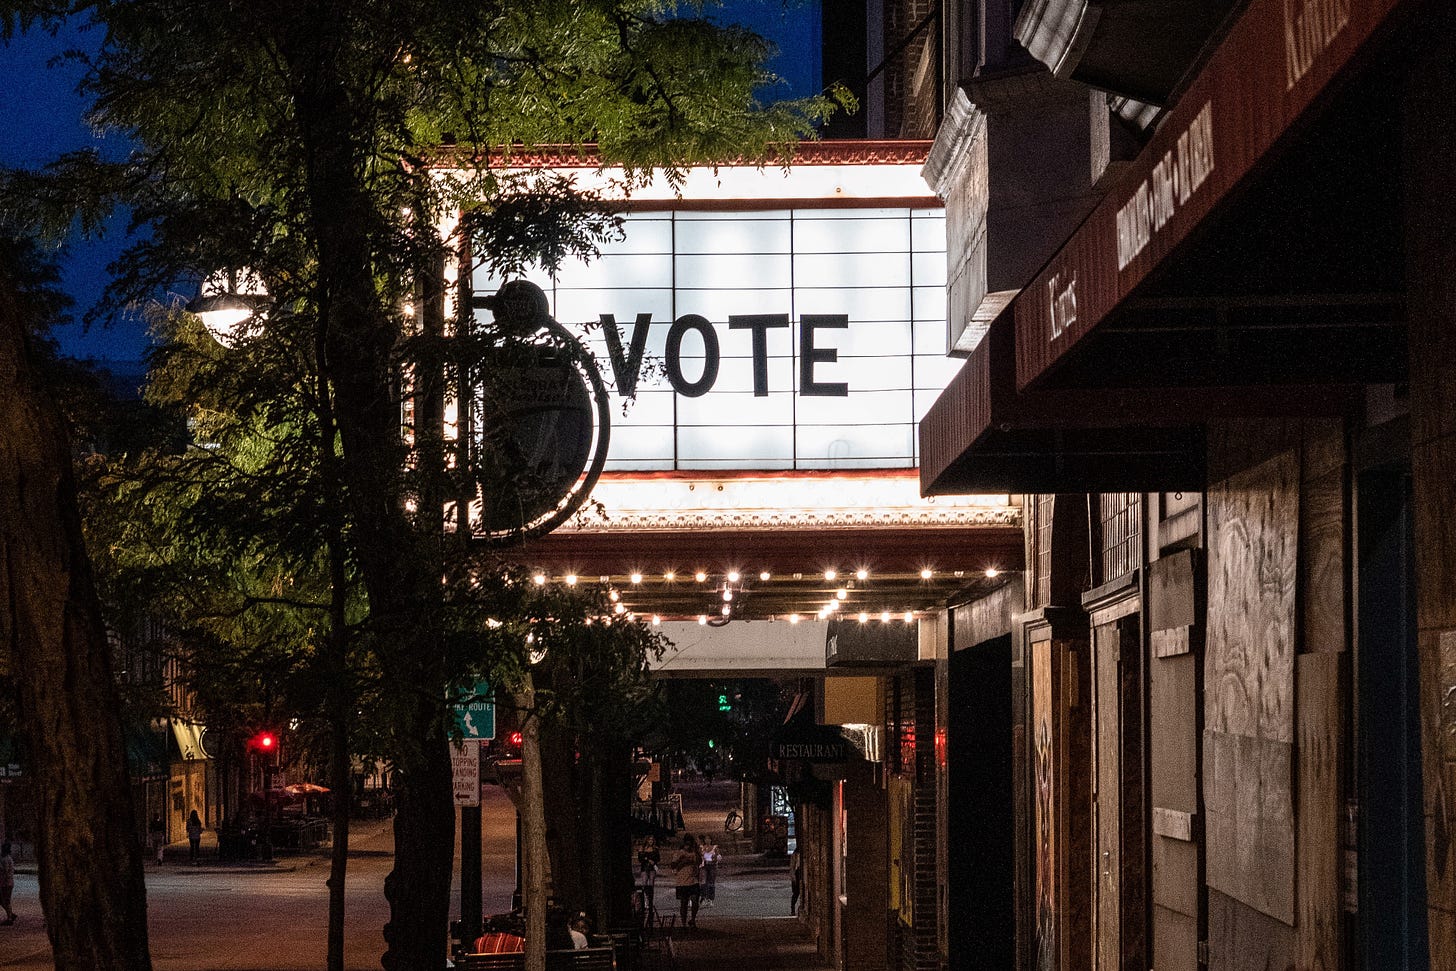 Movie theatre marquee with the word “VOTE” and a tree, at night